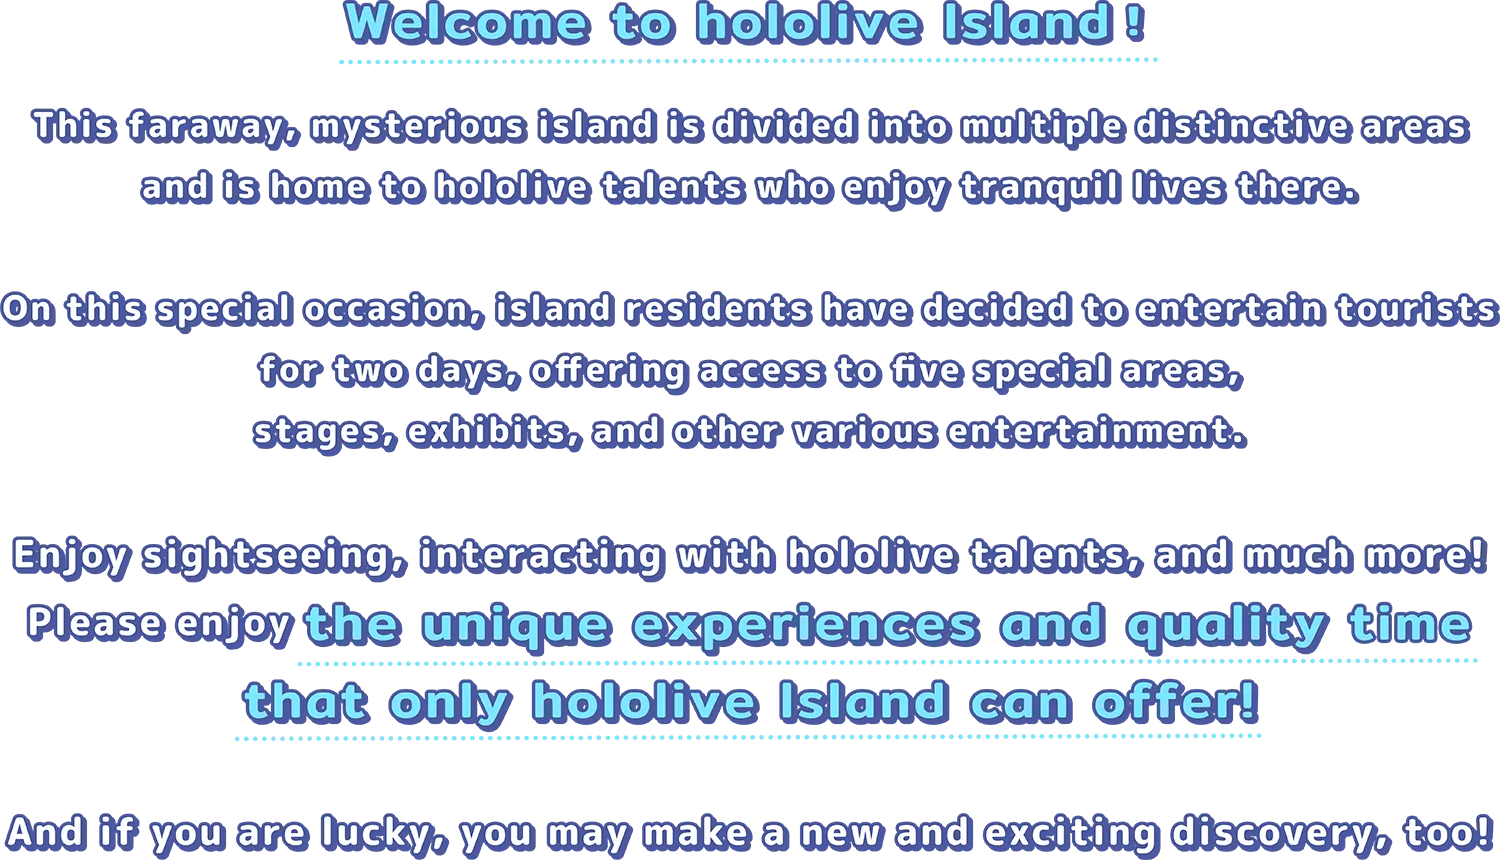 Welcome to hololive Island! This faraway, mysterious island is divided into multiple distinctive areas and is home to hololive talents who enjoy tranquil lives there. On this special occasion, island residents have decided to entertain tourists for two days, offering access to five special areas, stages, exhibits, and other various entertainment. Enjoy sightseeing, interacting with hololive talents, and much more! Please enjoy the unique experiences and quality time that only hololive Island can offer! And if you are lucky, you may make a new and exciting discovery, too!